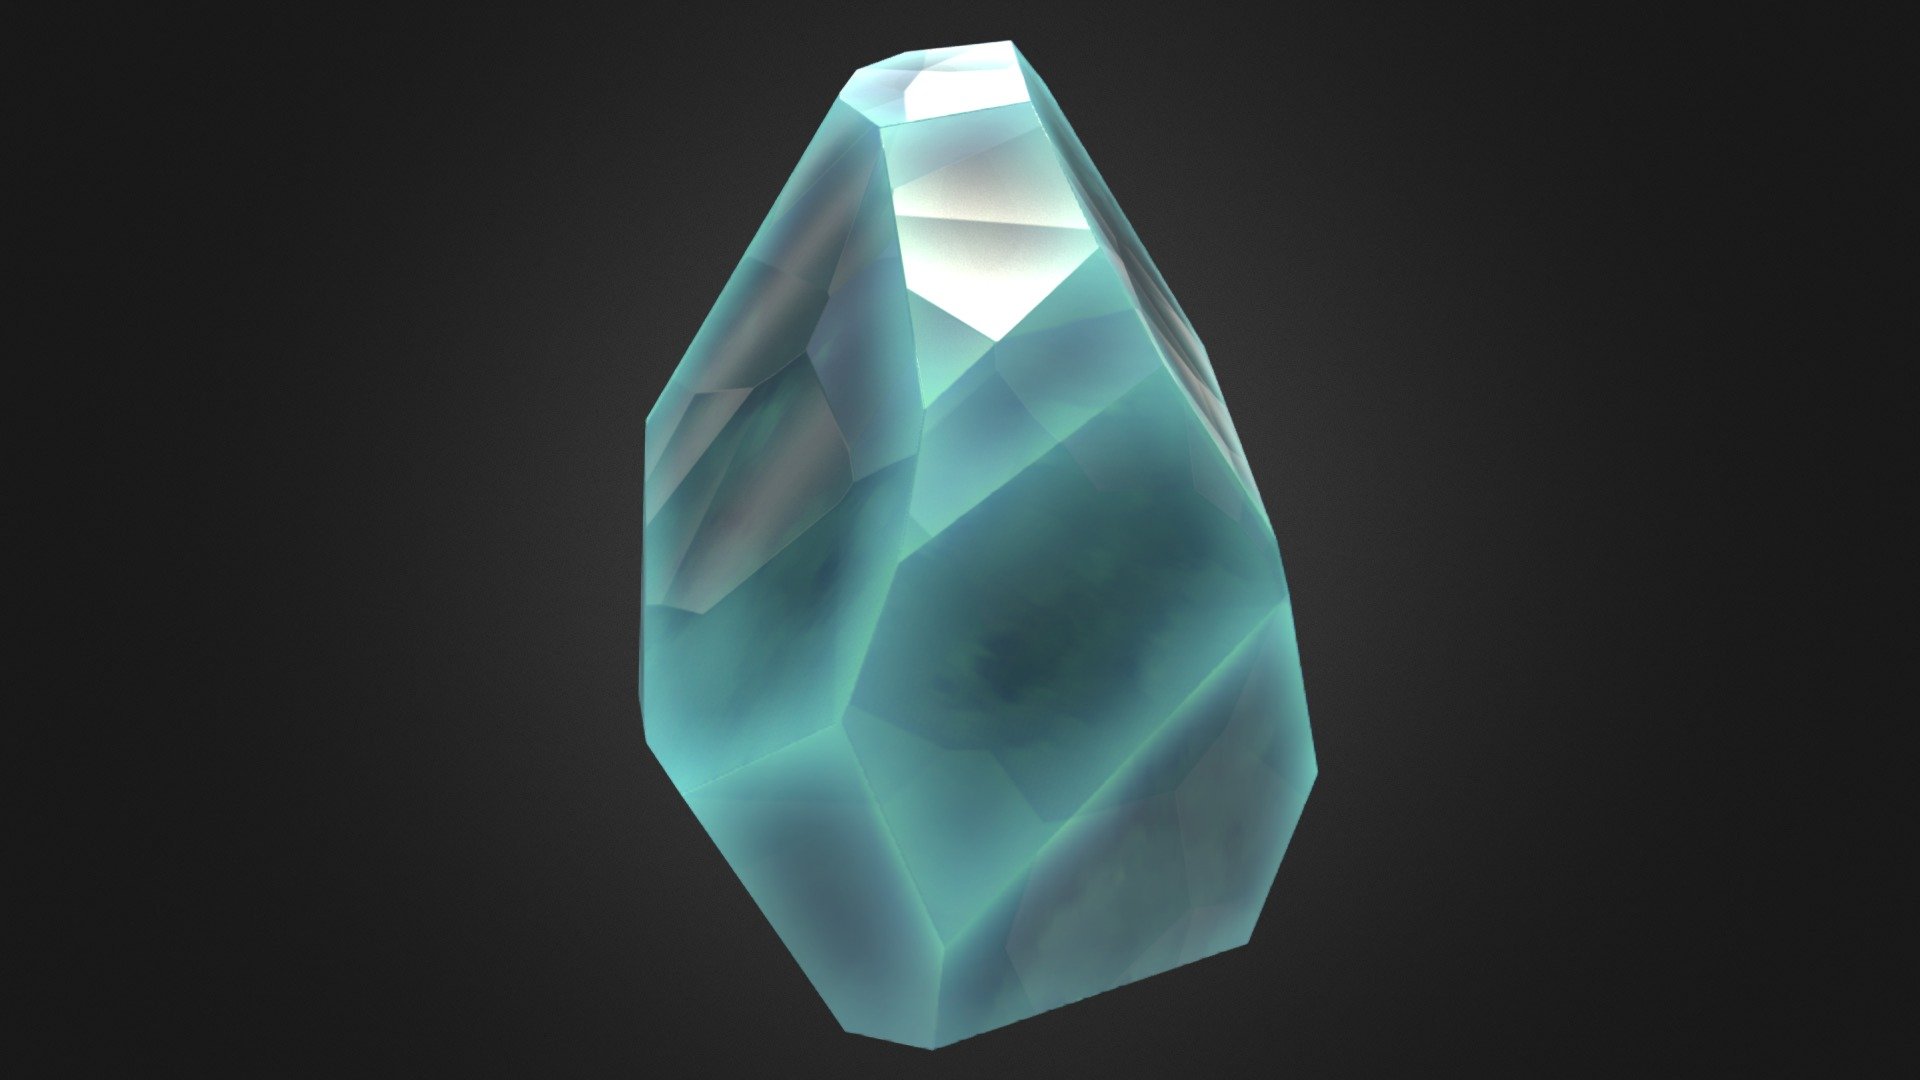 Simple low poly crystal for scene or game project.
(game ready asset)

You can purchase the complete pack here.


Tris: 112




Texture 2k.

PBR Material.

Low poly.

No internal or hidden geometry.

Hand painted.

Free for use on any personal or commercial project.

If you need a personal customization please let me know in the comments.
Don't forget to check out our other uploads.

You can support our work purchasing one of our items.
Link in the bio 3d model